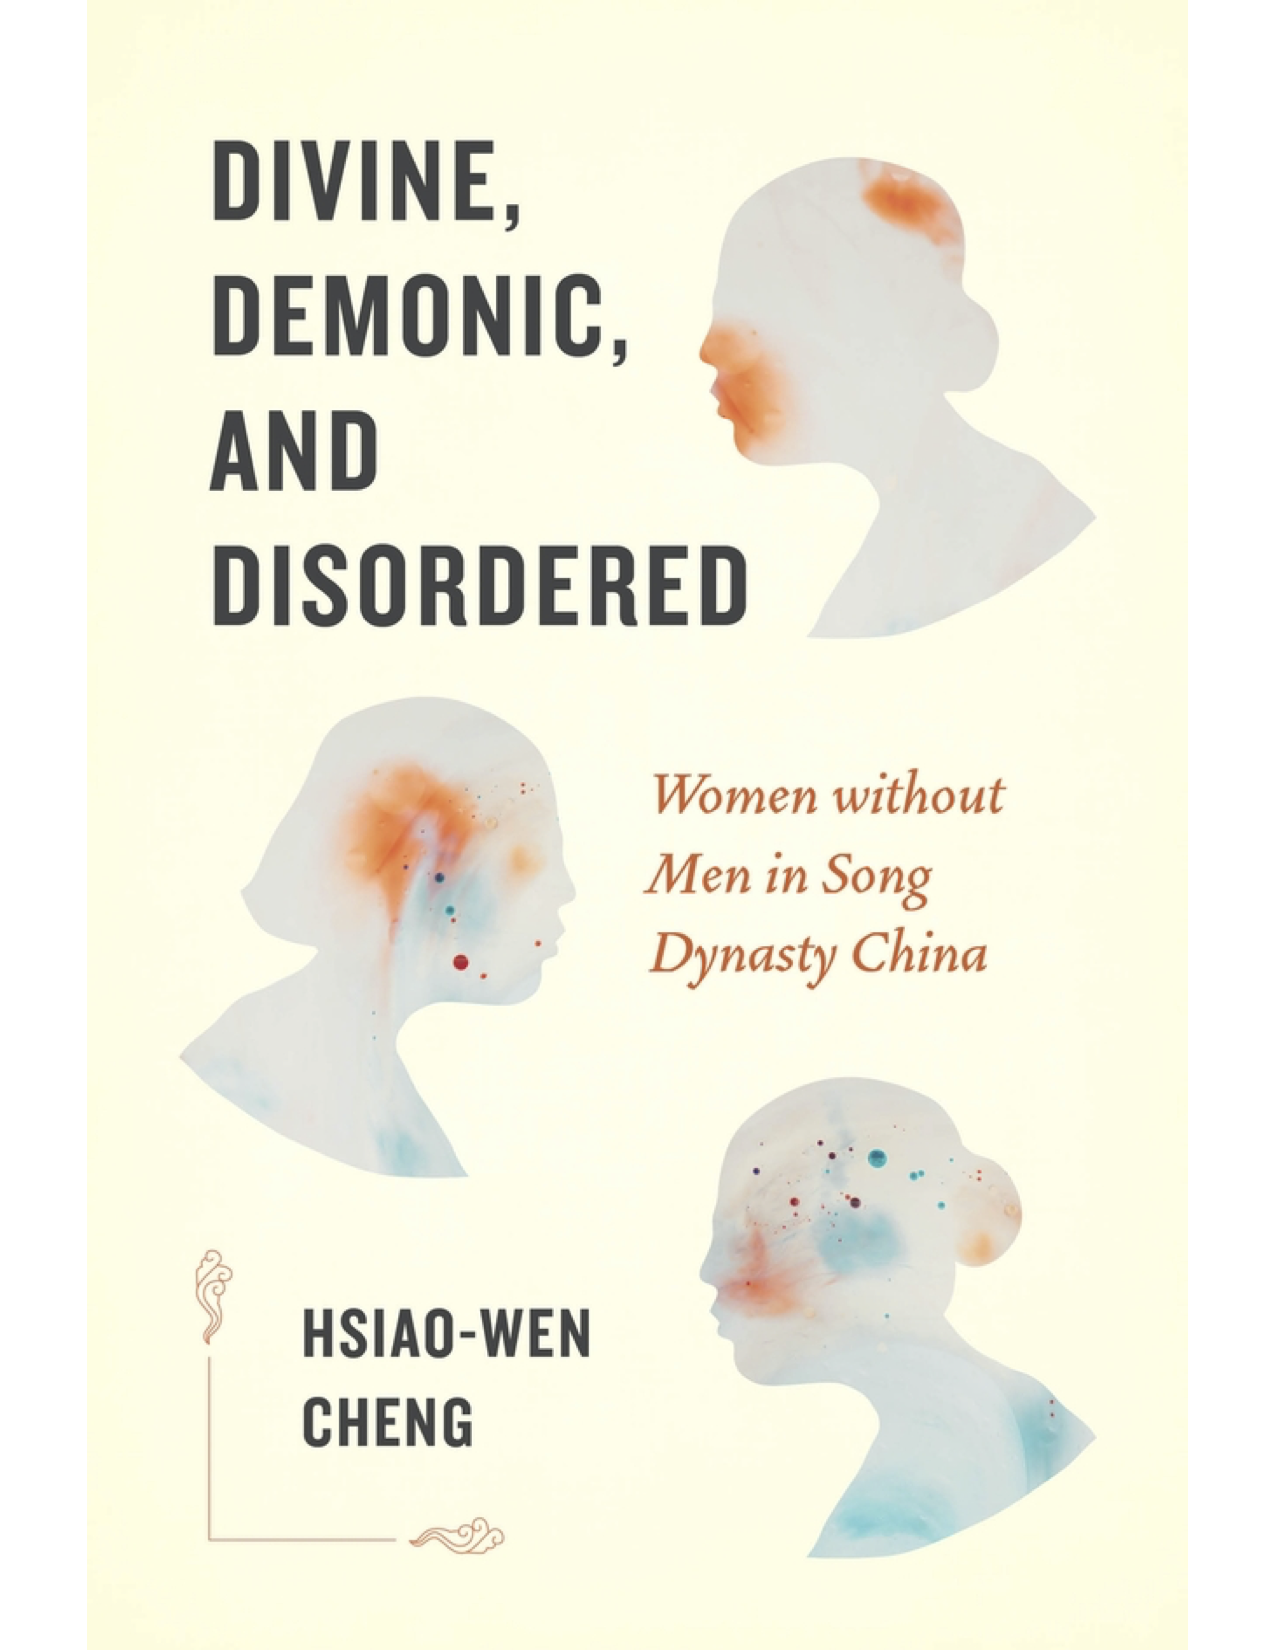 Photo Of Book Cover For The Book Entitled Divine, Demonic, And Disordered: Women Without Men In Song Dynasty China